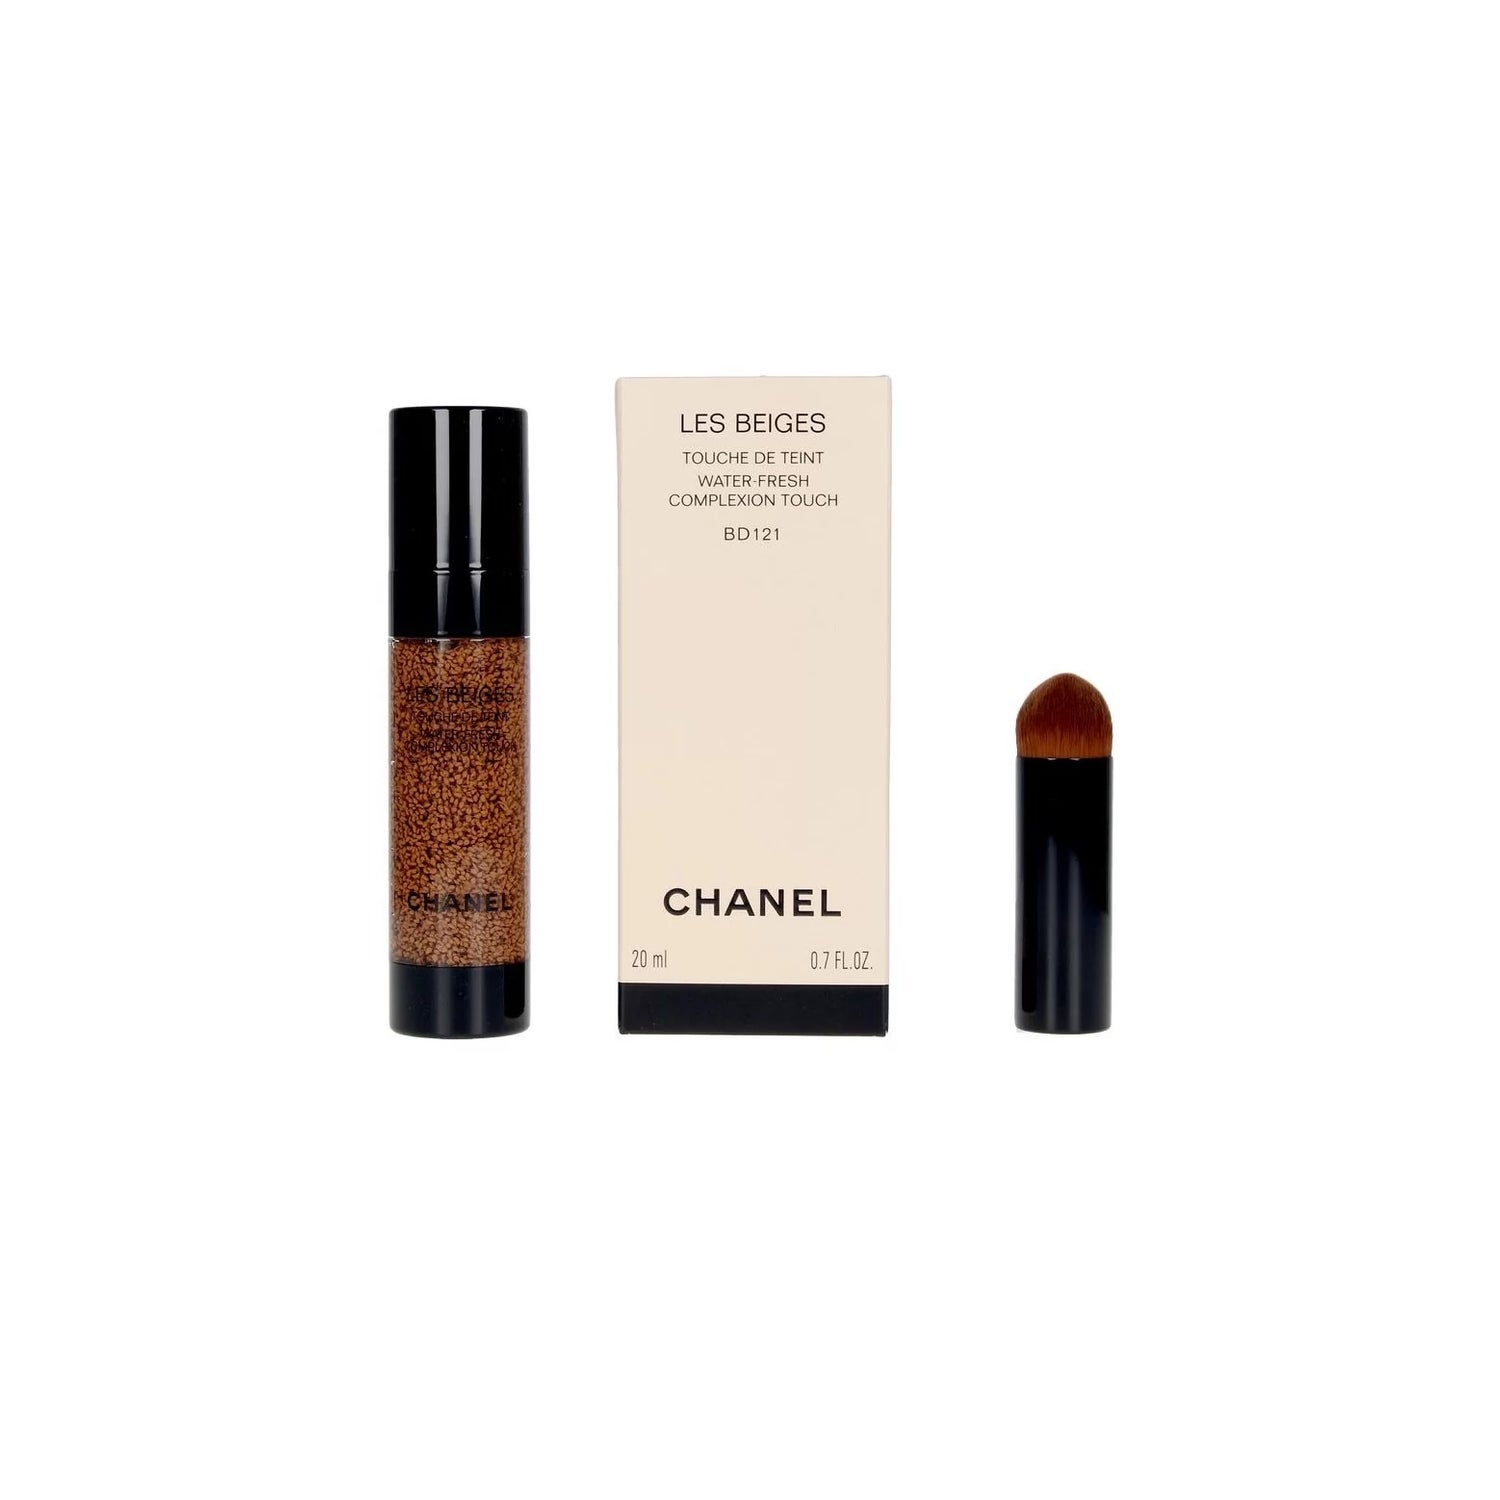 Chanel Les Beiges Water-Fresh Complexion Touch Nro Bd121 20ml